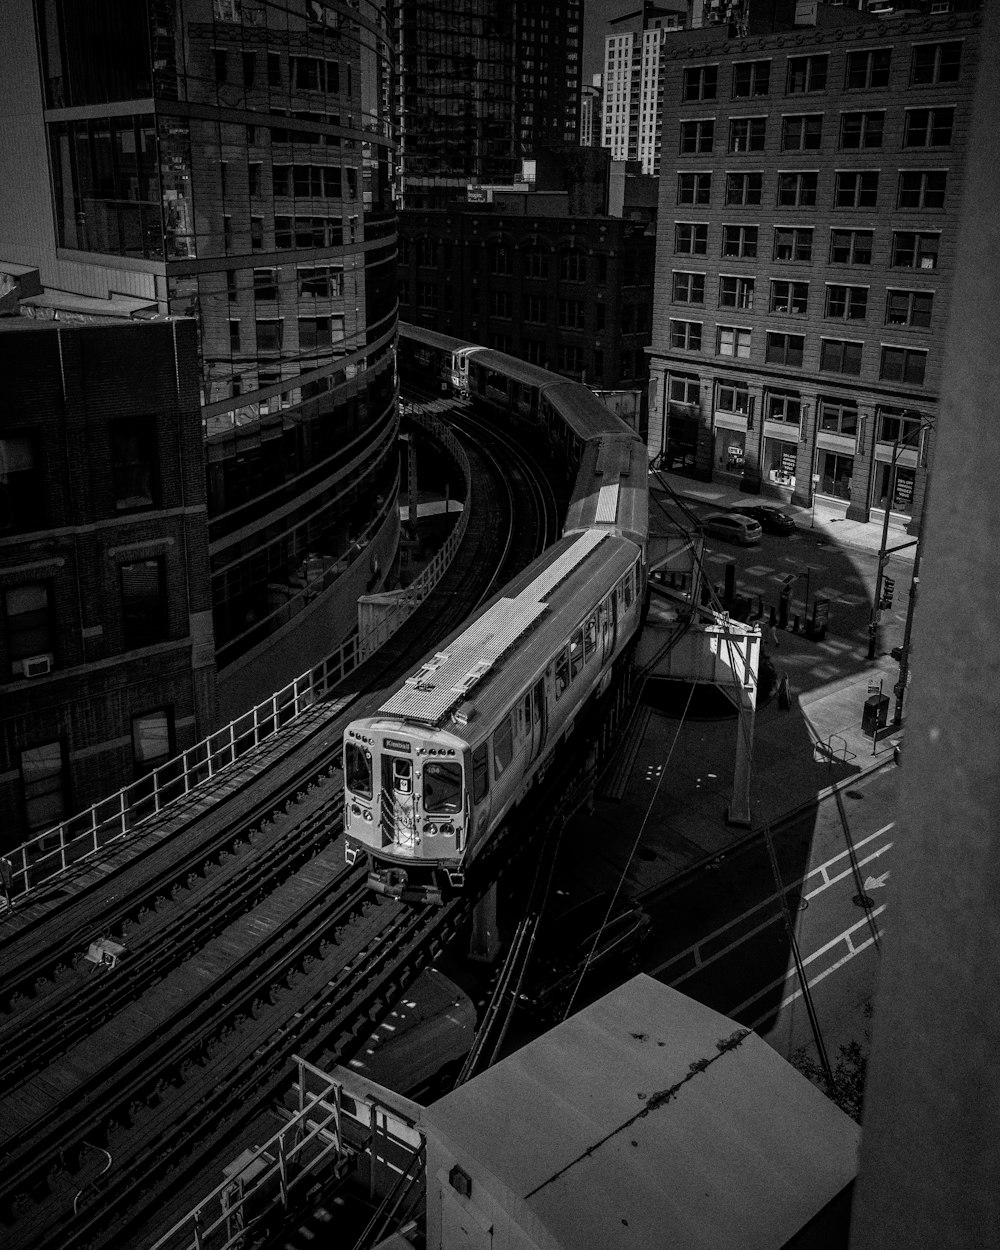 a black and white photo of a train in a city